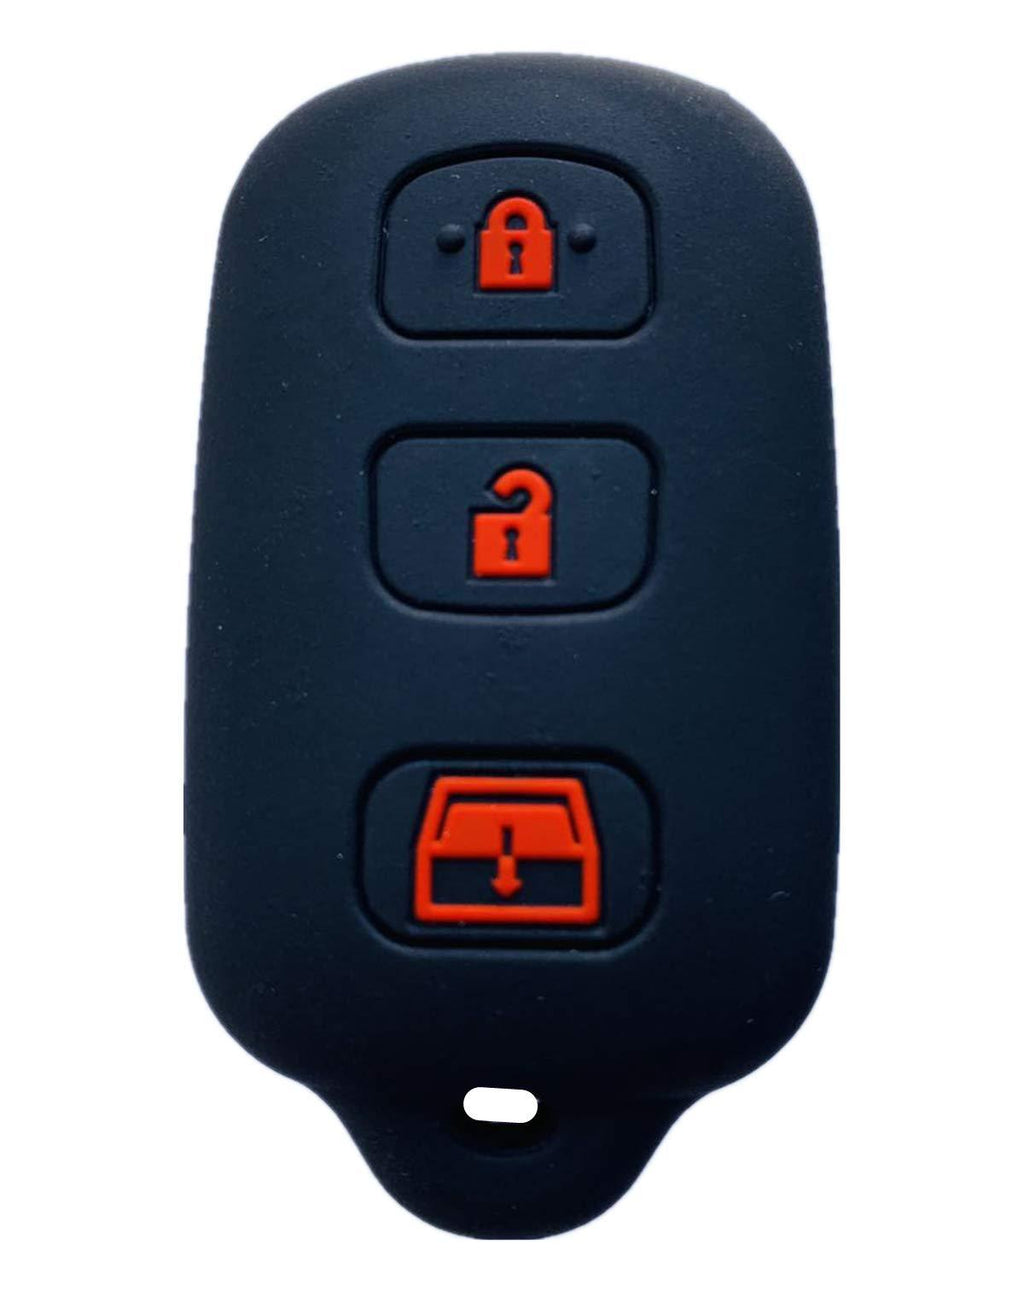  [AUSTRALIA] - Rpkey Silicone Keyless Entry Remote Control Key Fob Cover Case protector For 1999-2009 Toyota 4Runner 2001-2008 Toyota Sequoia HYQ12BBX HYQ12BAN HYQ1512Y